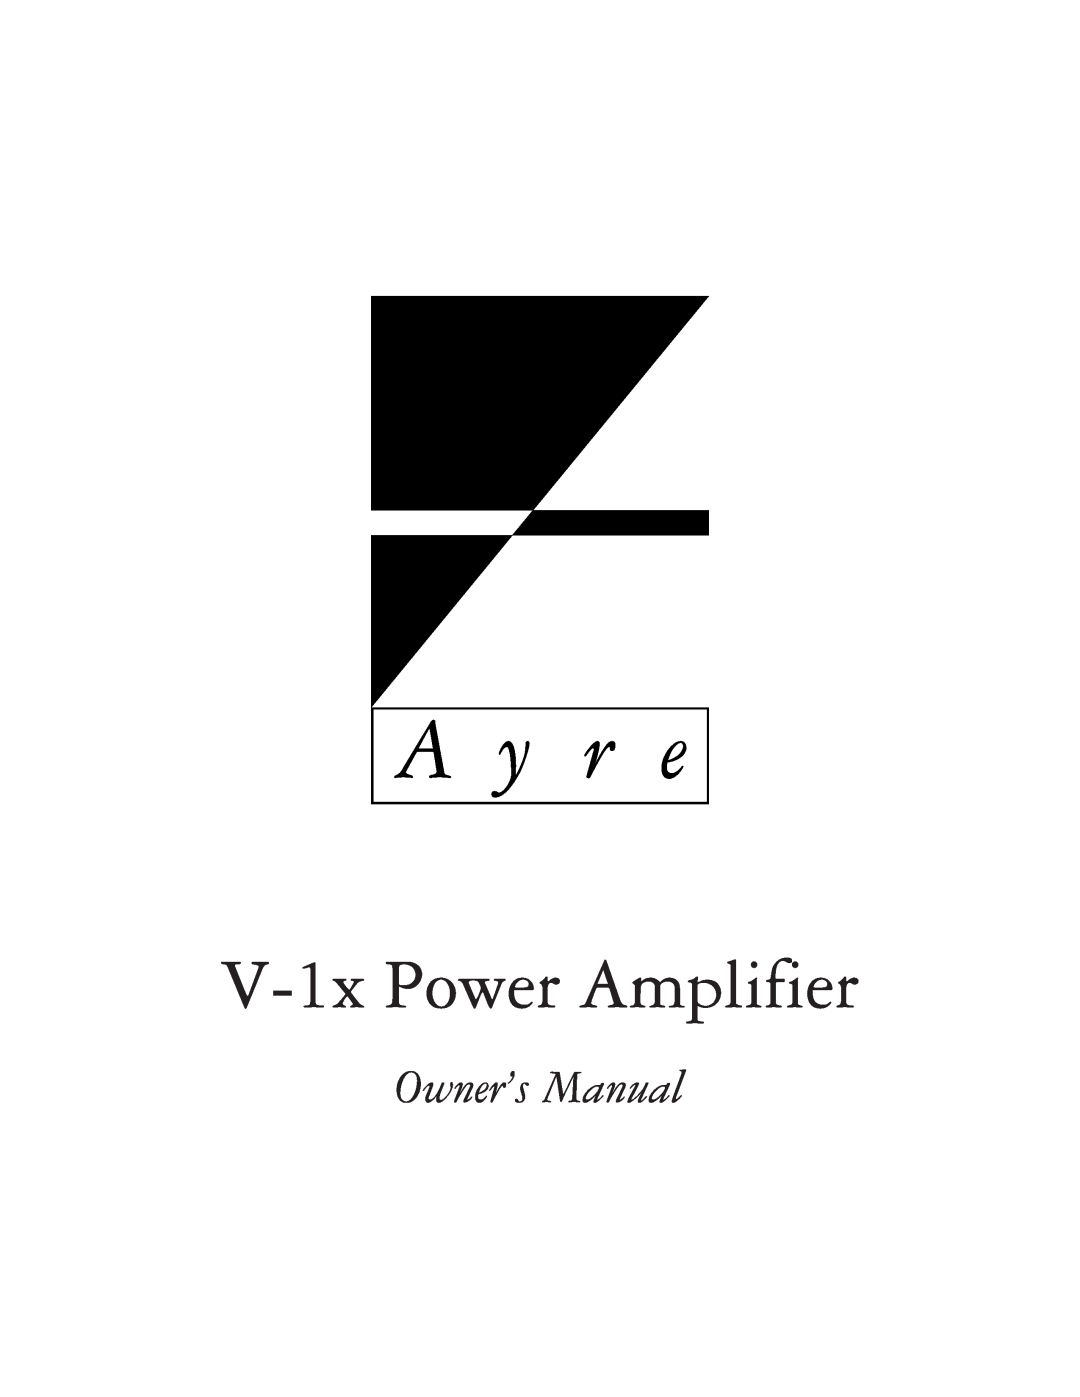 Ayre Acoustics owner manual A y r e, V-1xPower Amplifier 